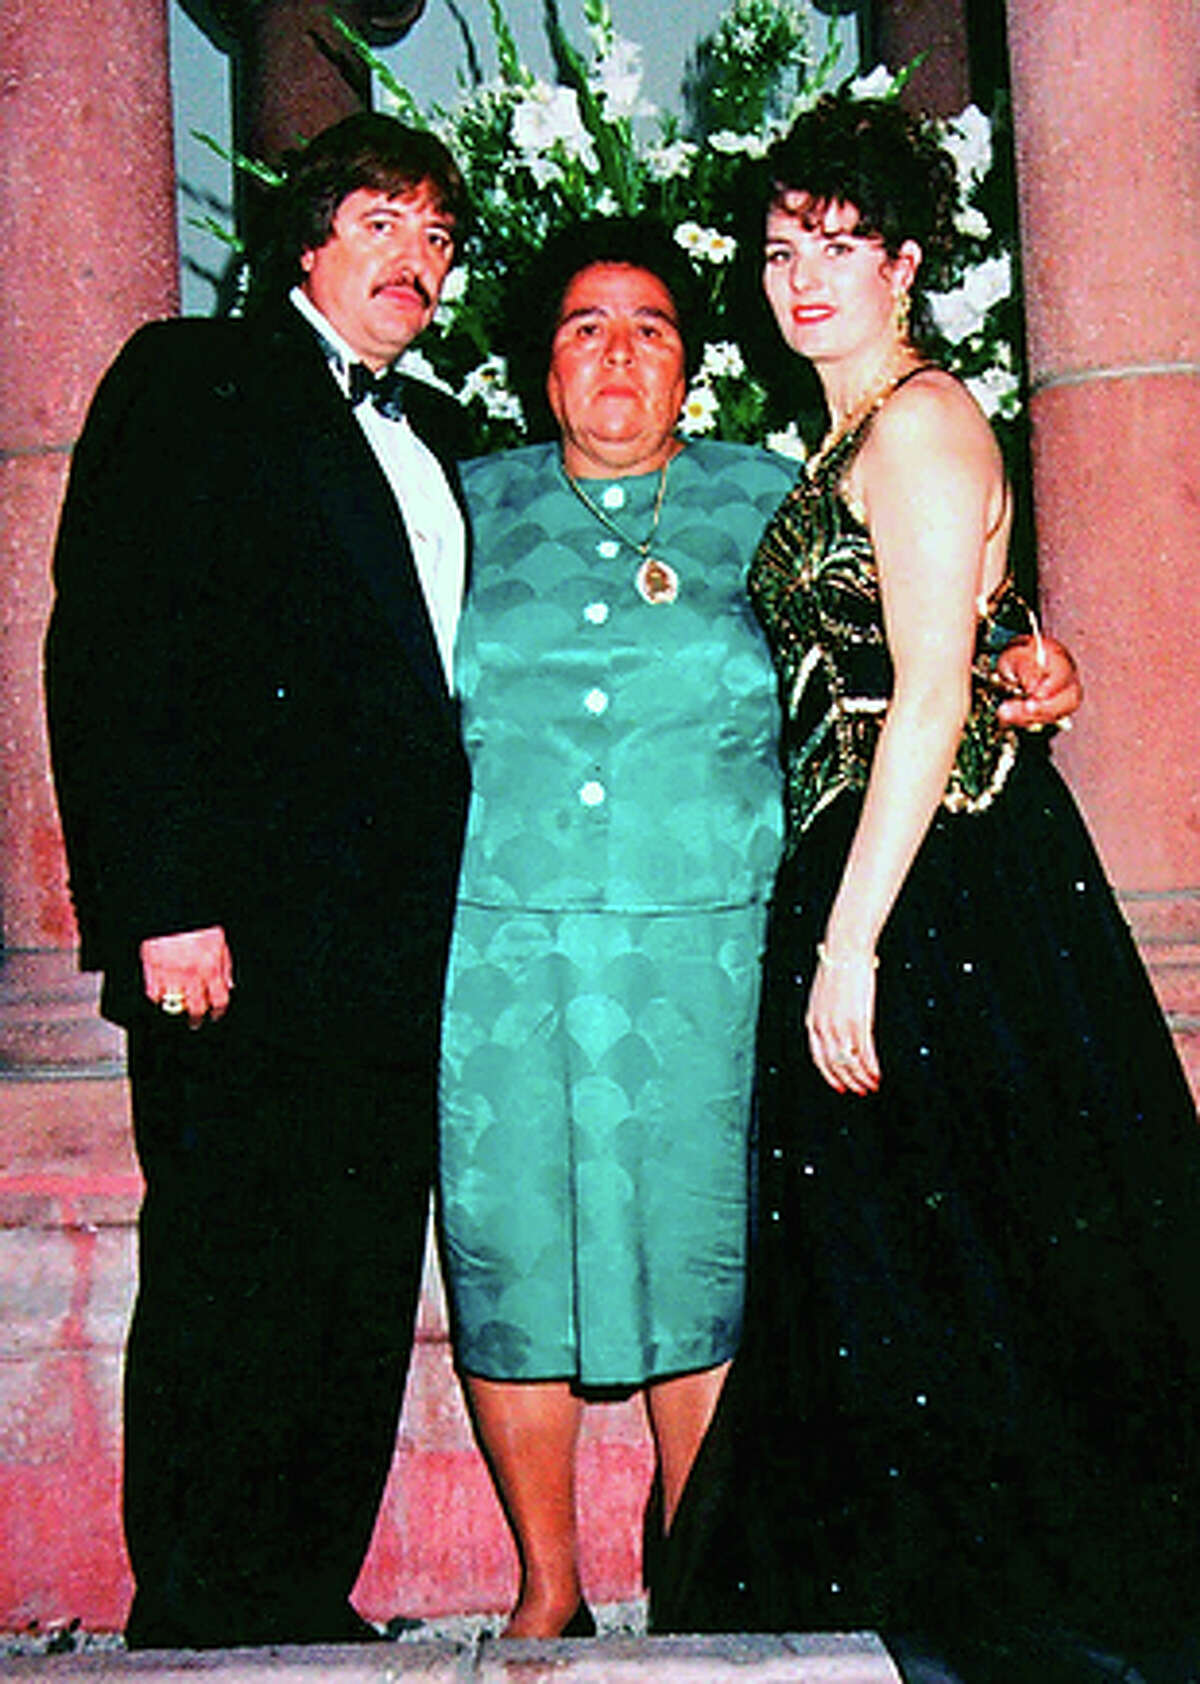 Deceased:Amado Carrillo Fuentes, known as the "Lord of the Skies," took the most unique path to his demise. He died from complications of plastic surgery intended to make him less recognizable. The doctors who did the deed were killed and their bodies stuffed in drums. His brother now runs the business, but the Juarez Cartel, cartel, based in Ciudad Juarez, across from El Paso, has shifted away from the smuggling of planes that gave Lord of the Skies his name and moved on to the cartels' new normal of barbaric crimes.